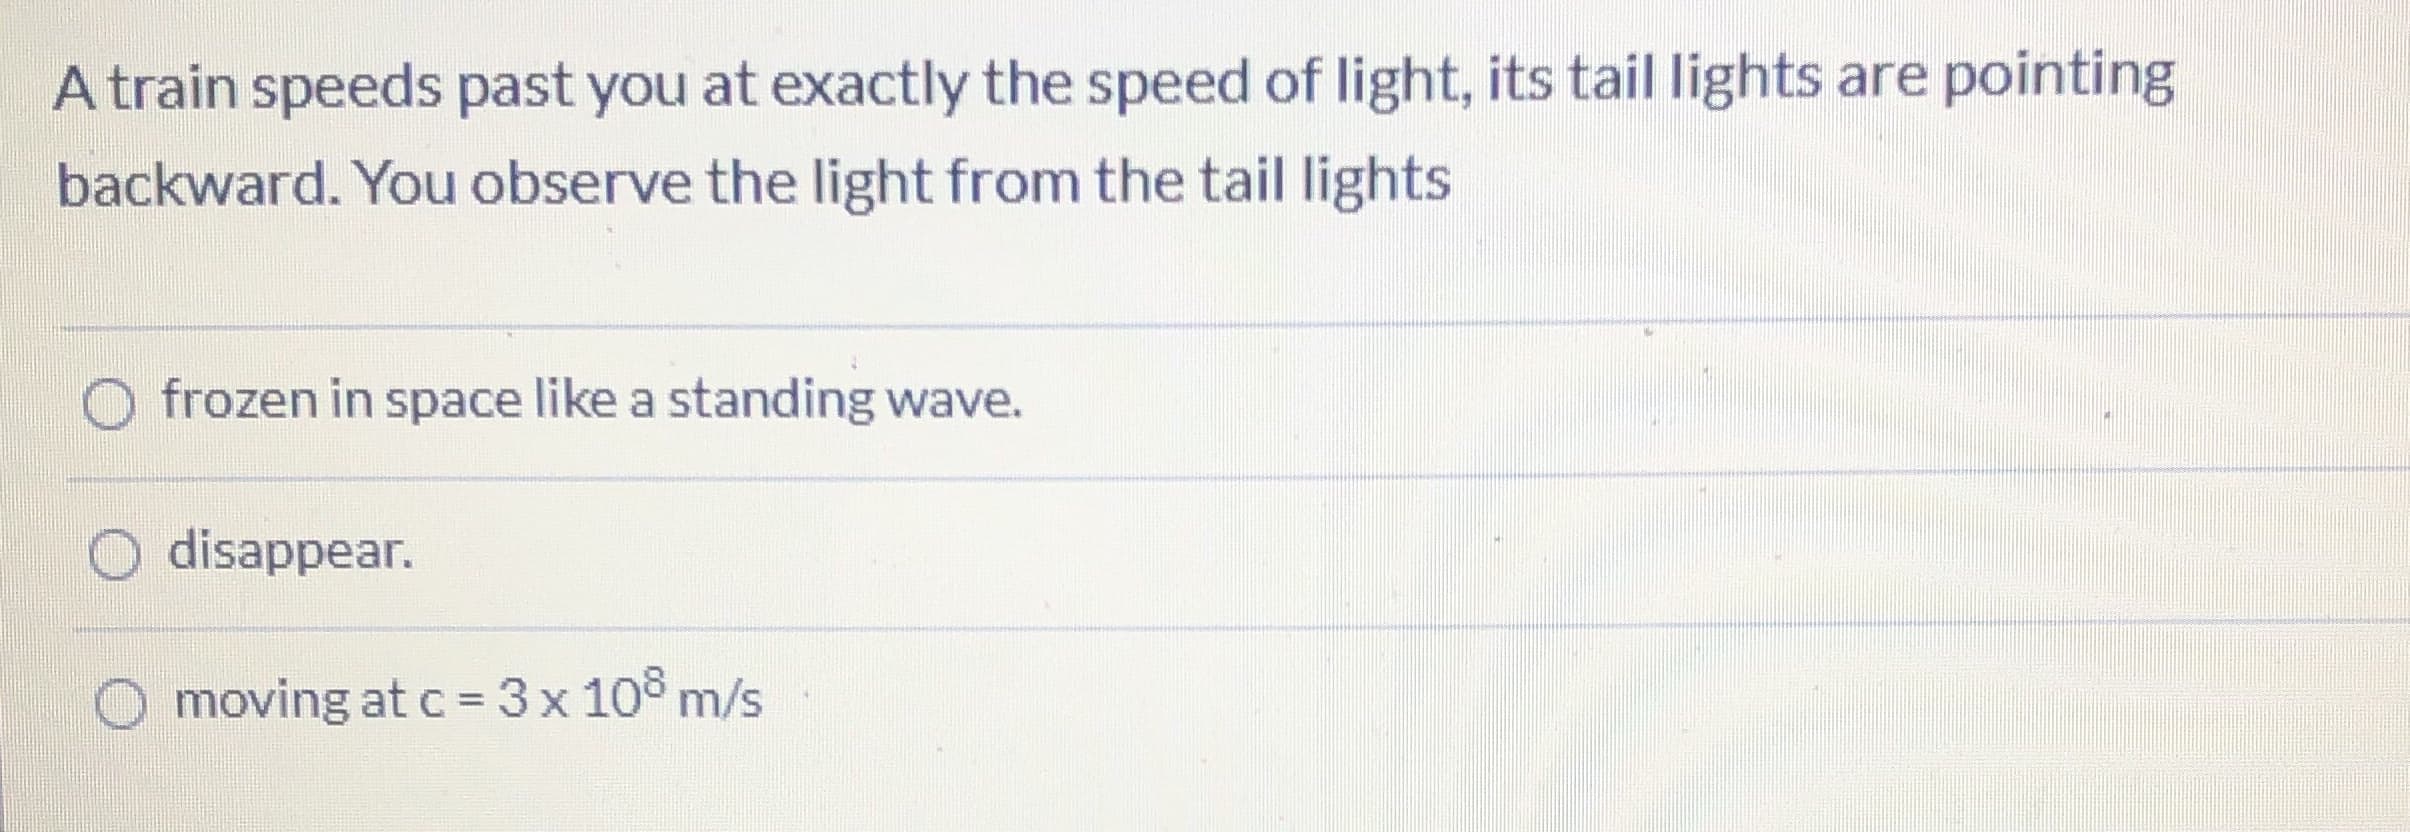 A train speeds past you at exactly the speed of light, its tail lights are pointing
backward. You observe the light from the tail lights
